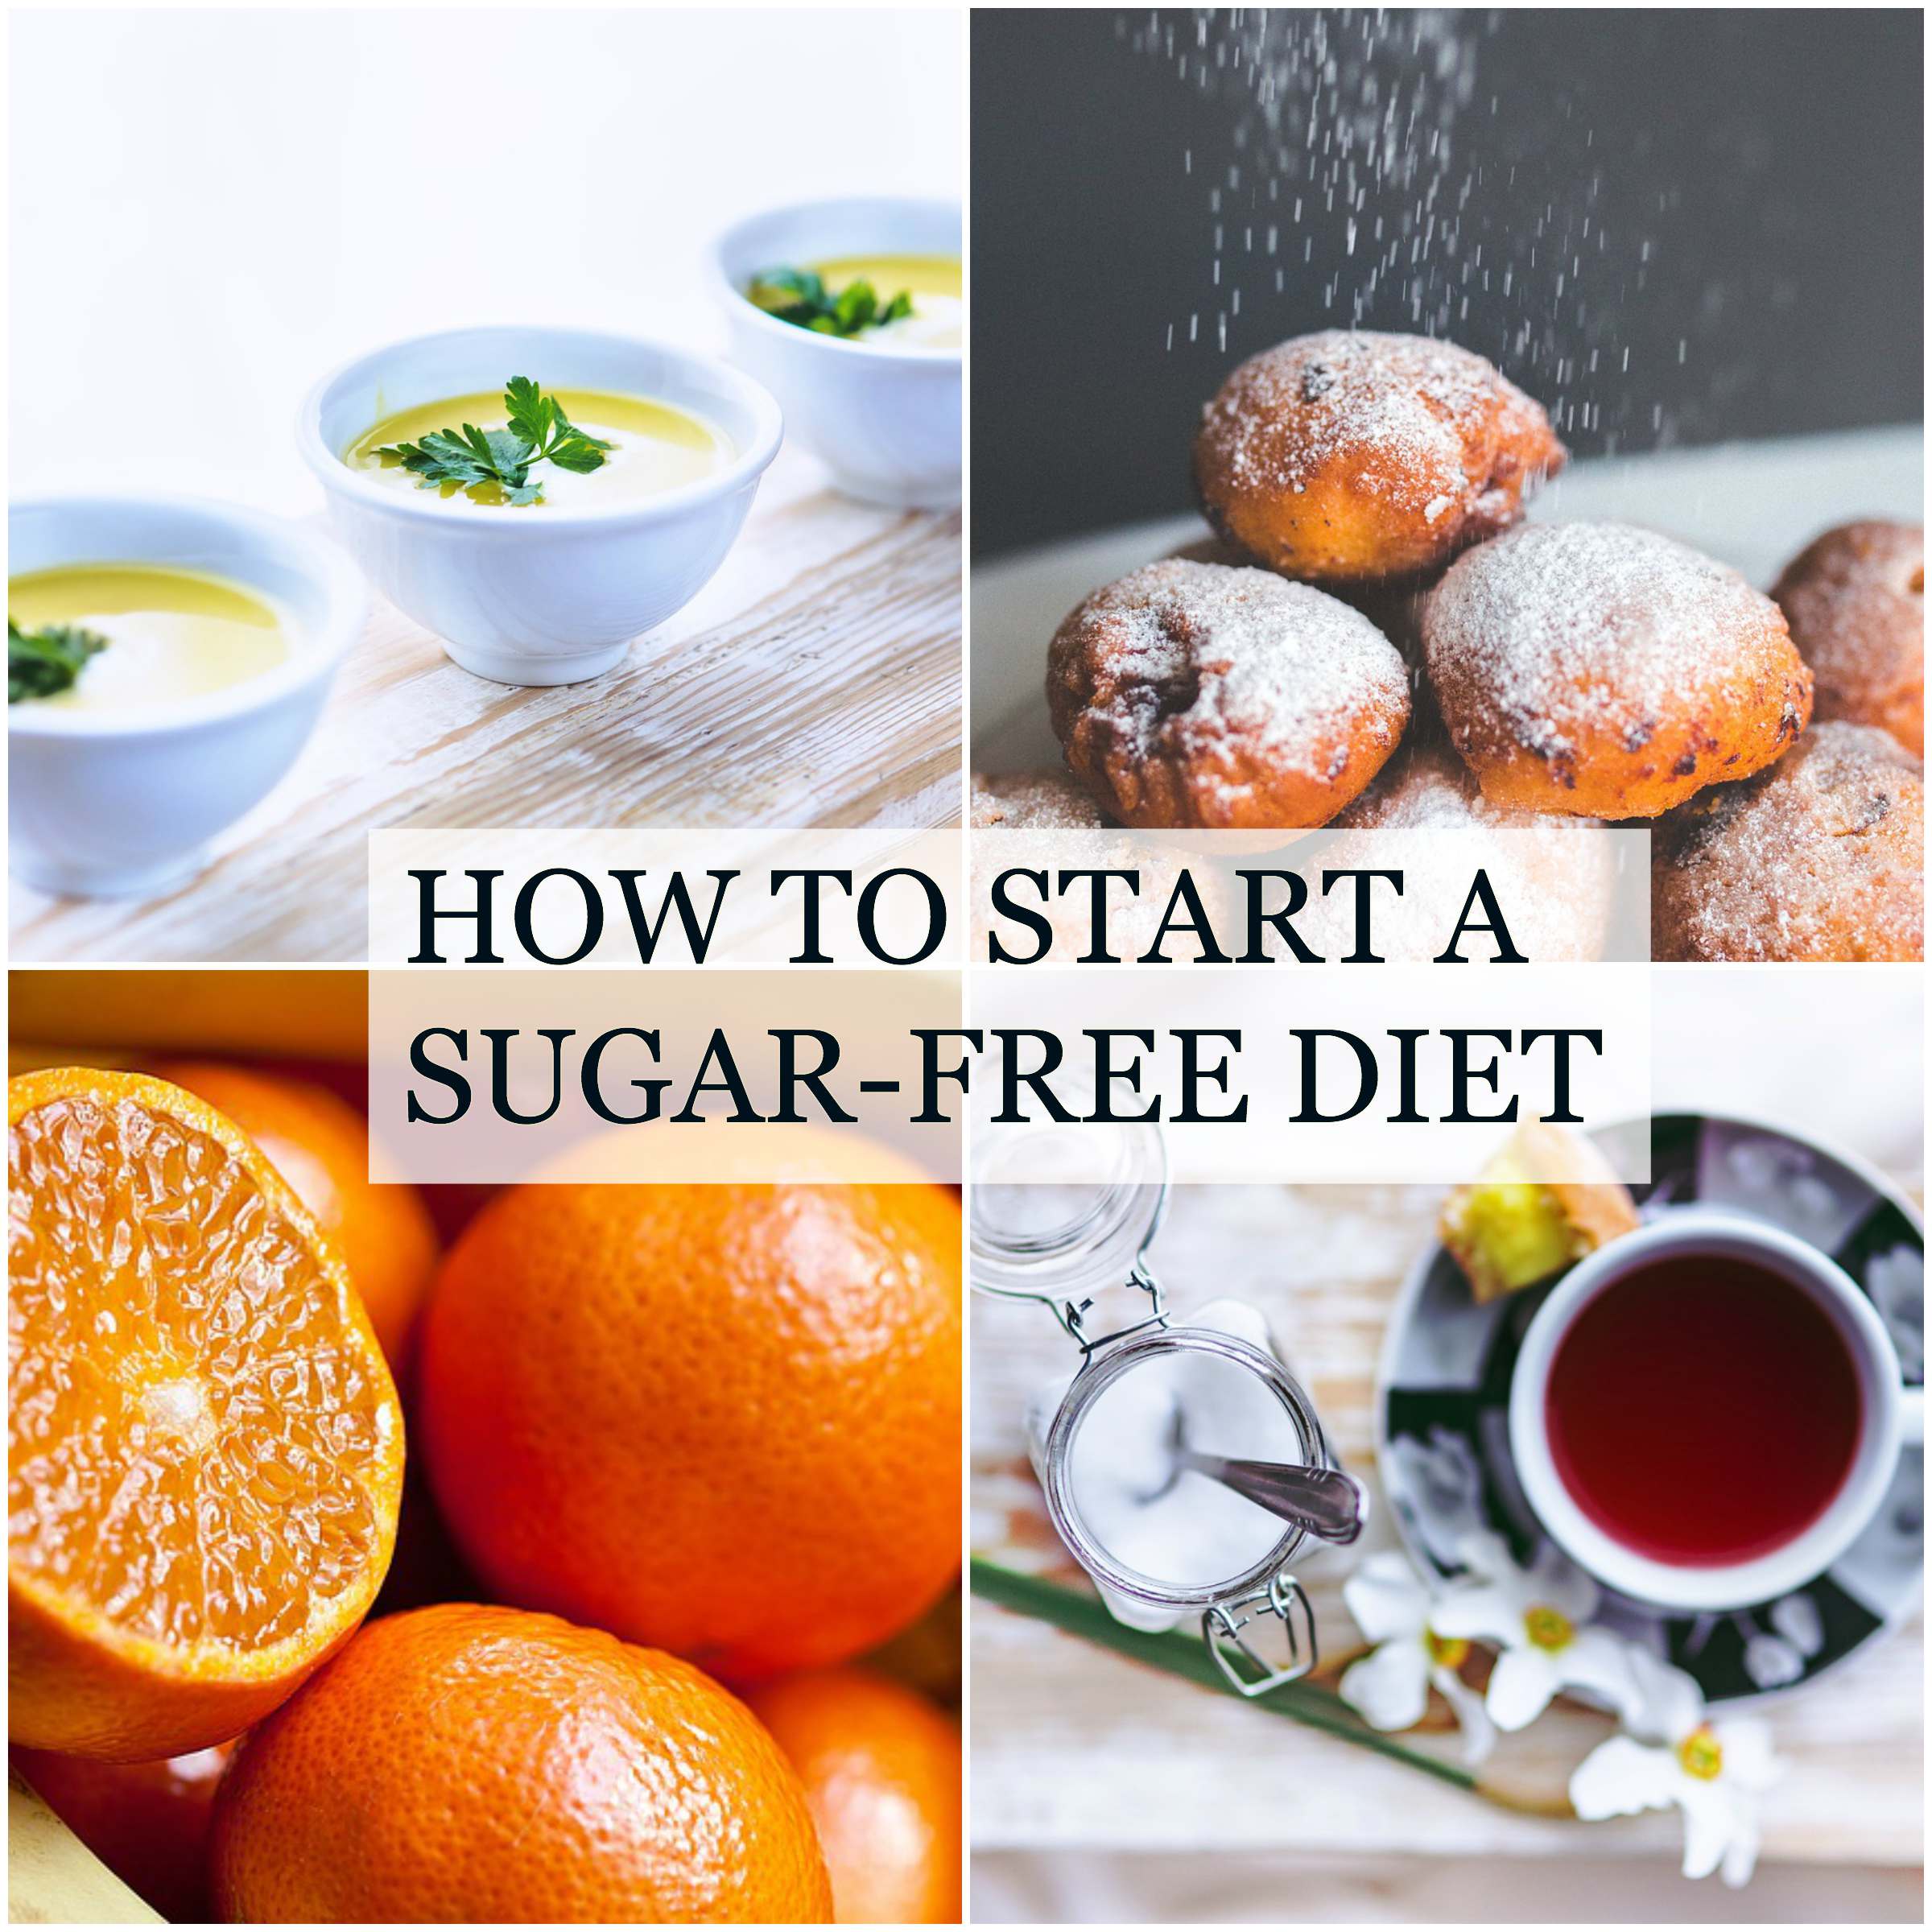 How to Start a Sugar